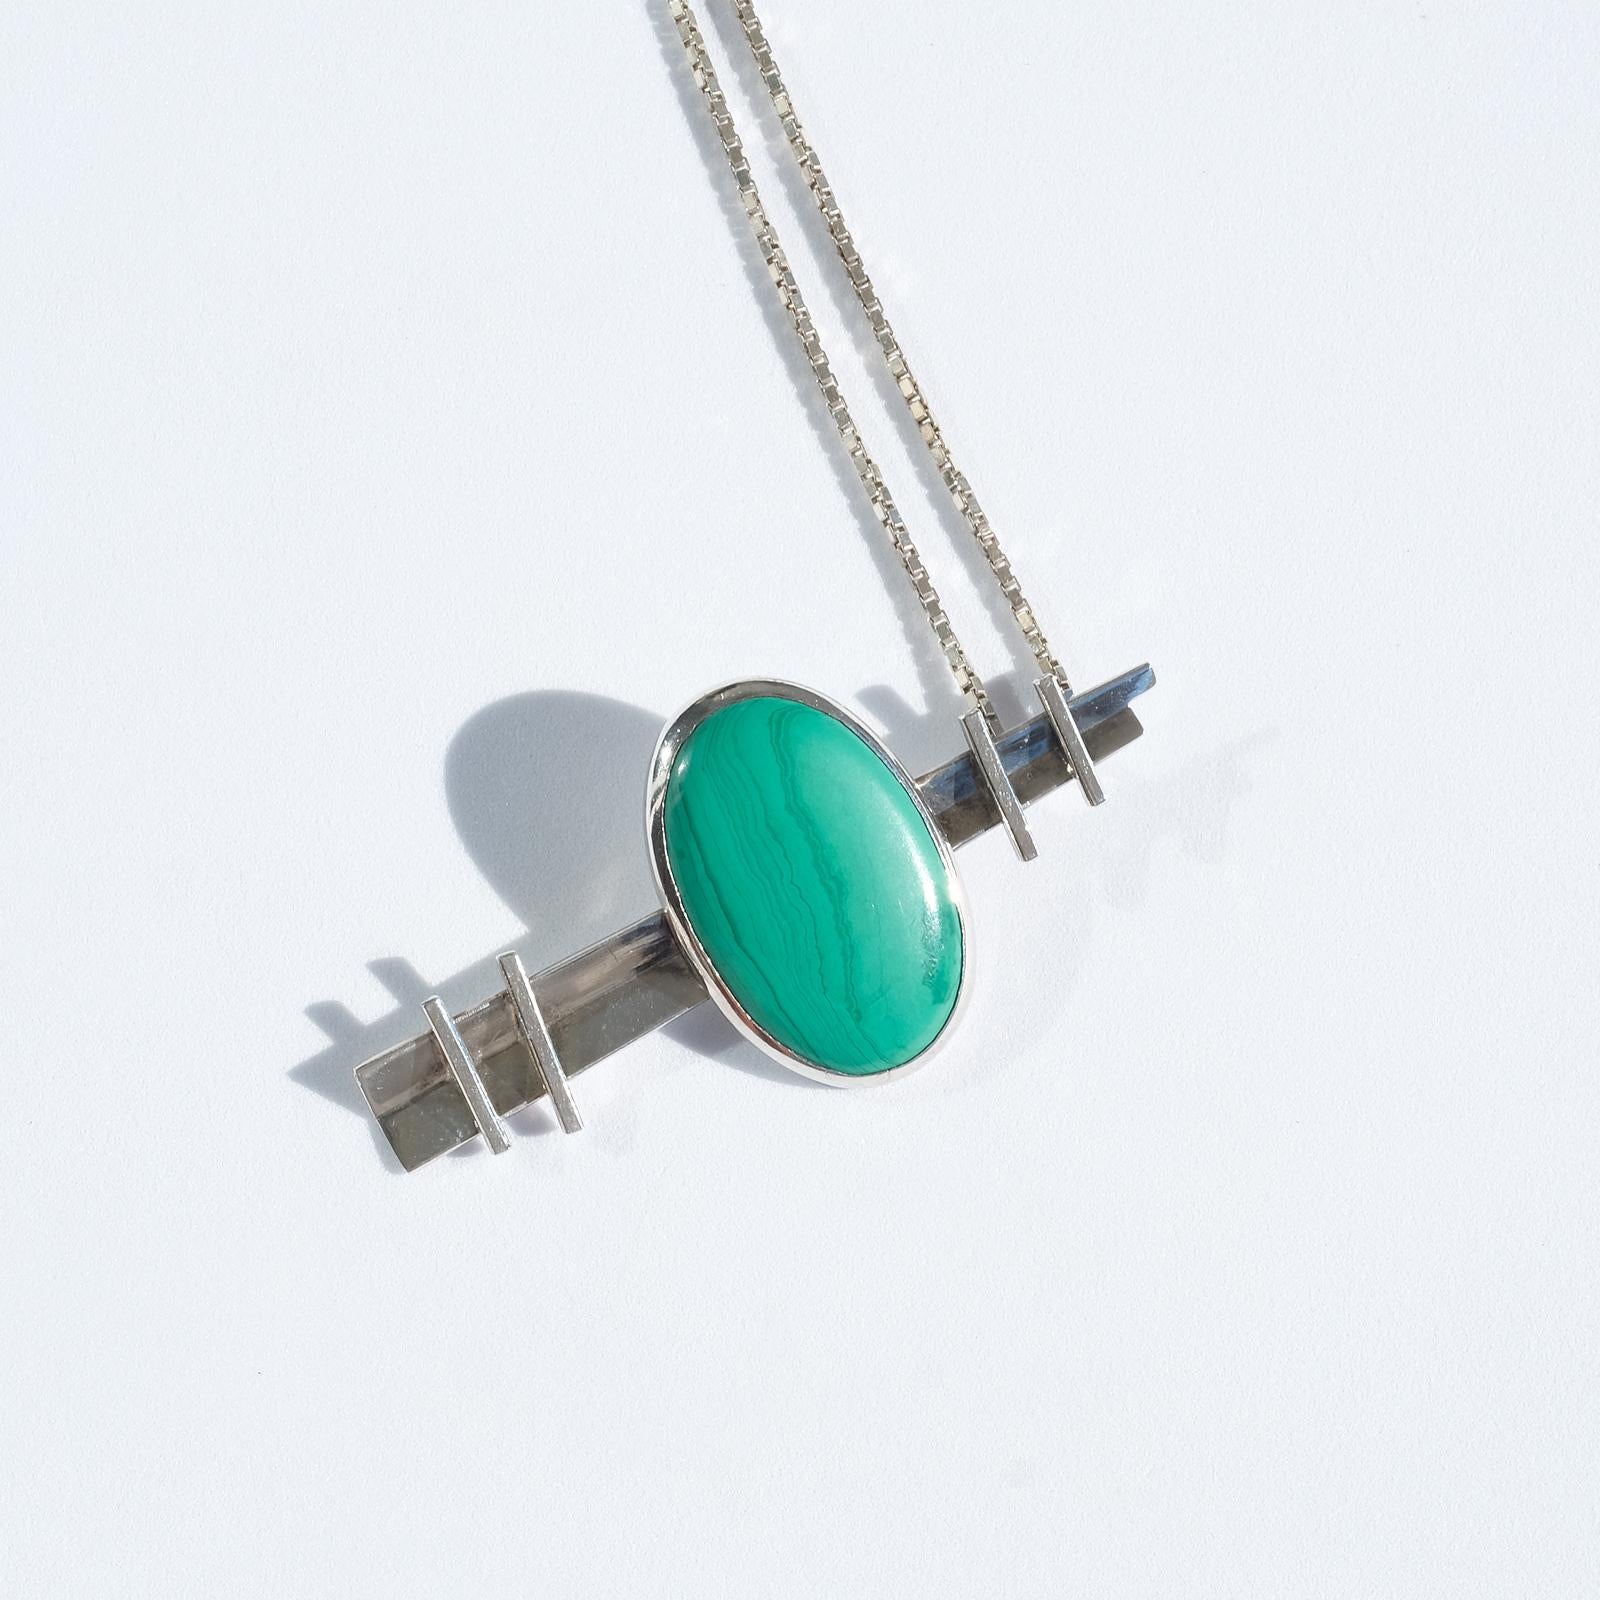 This sterling silver necklace has a venetian chain and a silver and malachite pendant. The malachite stone has a cabochon cut and it literally glows with its beautiful green color.

The necklace is perfect for the everyday wardrobe. 

Did you know